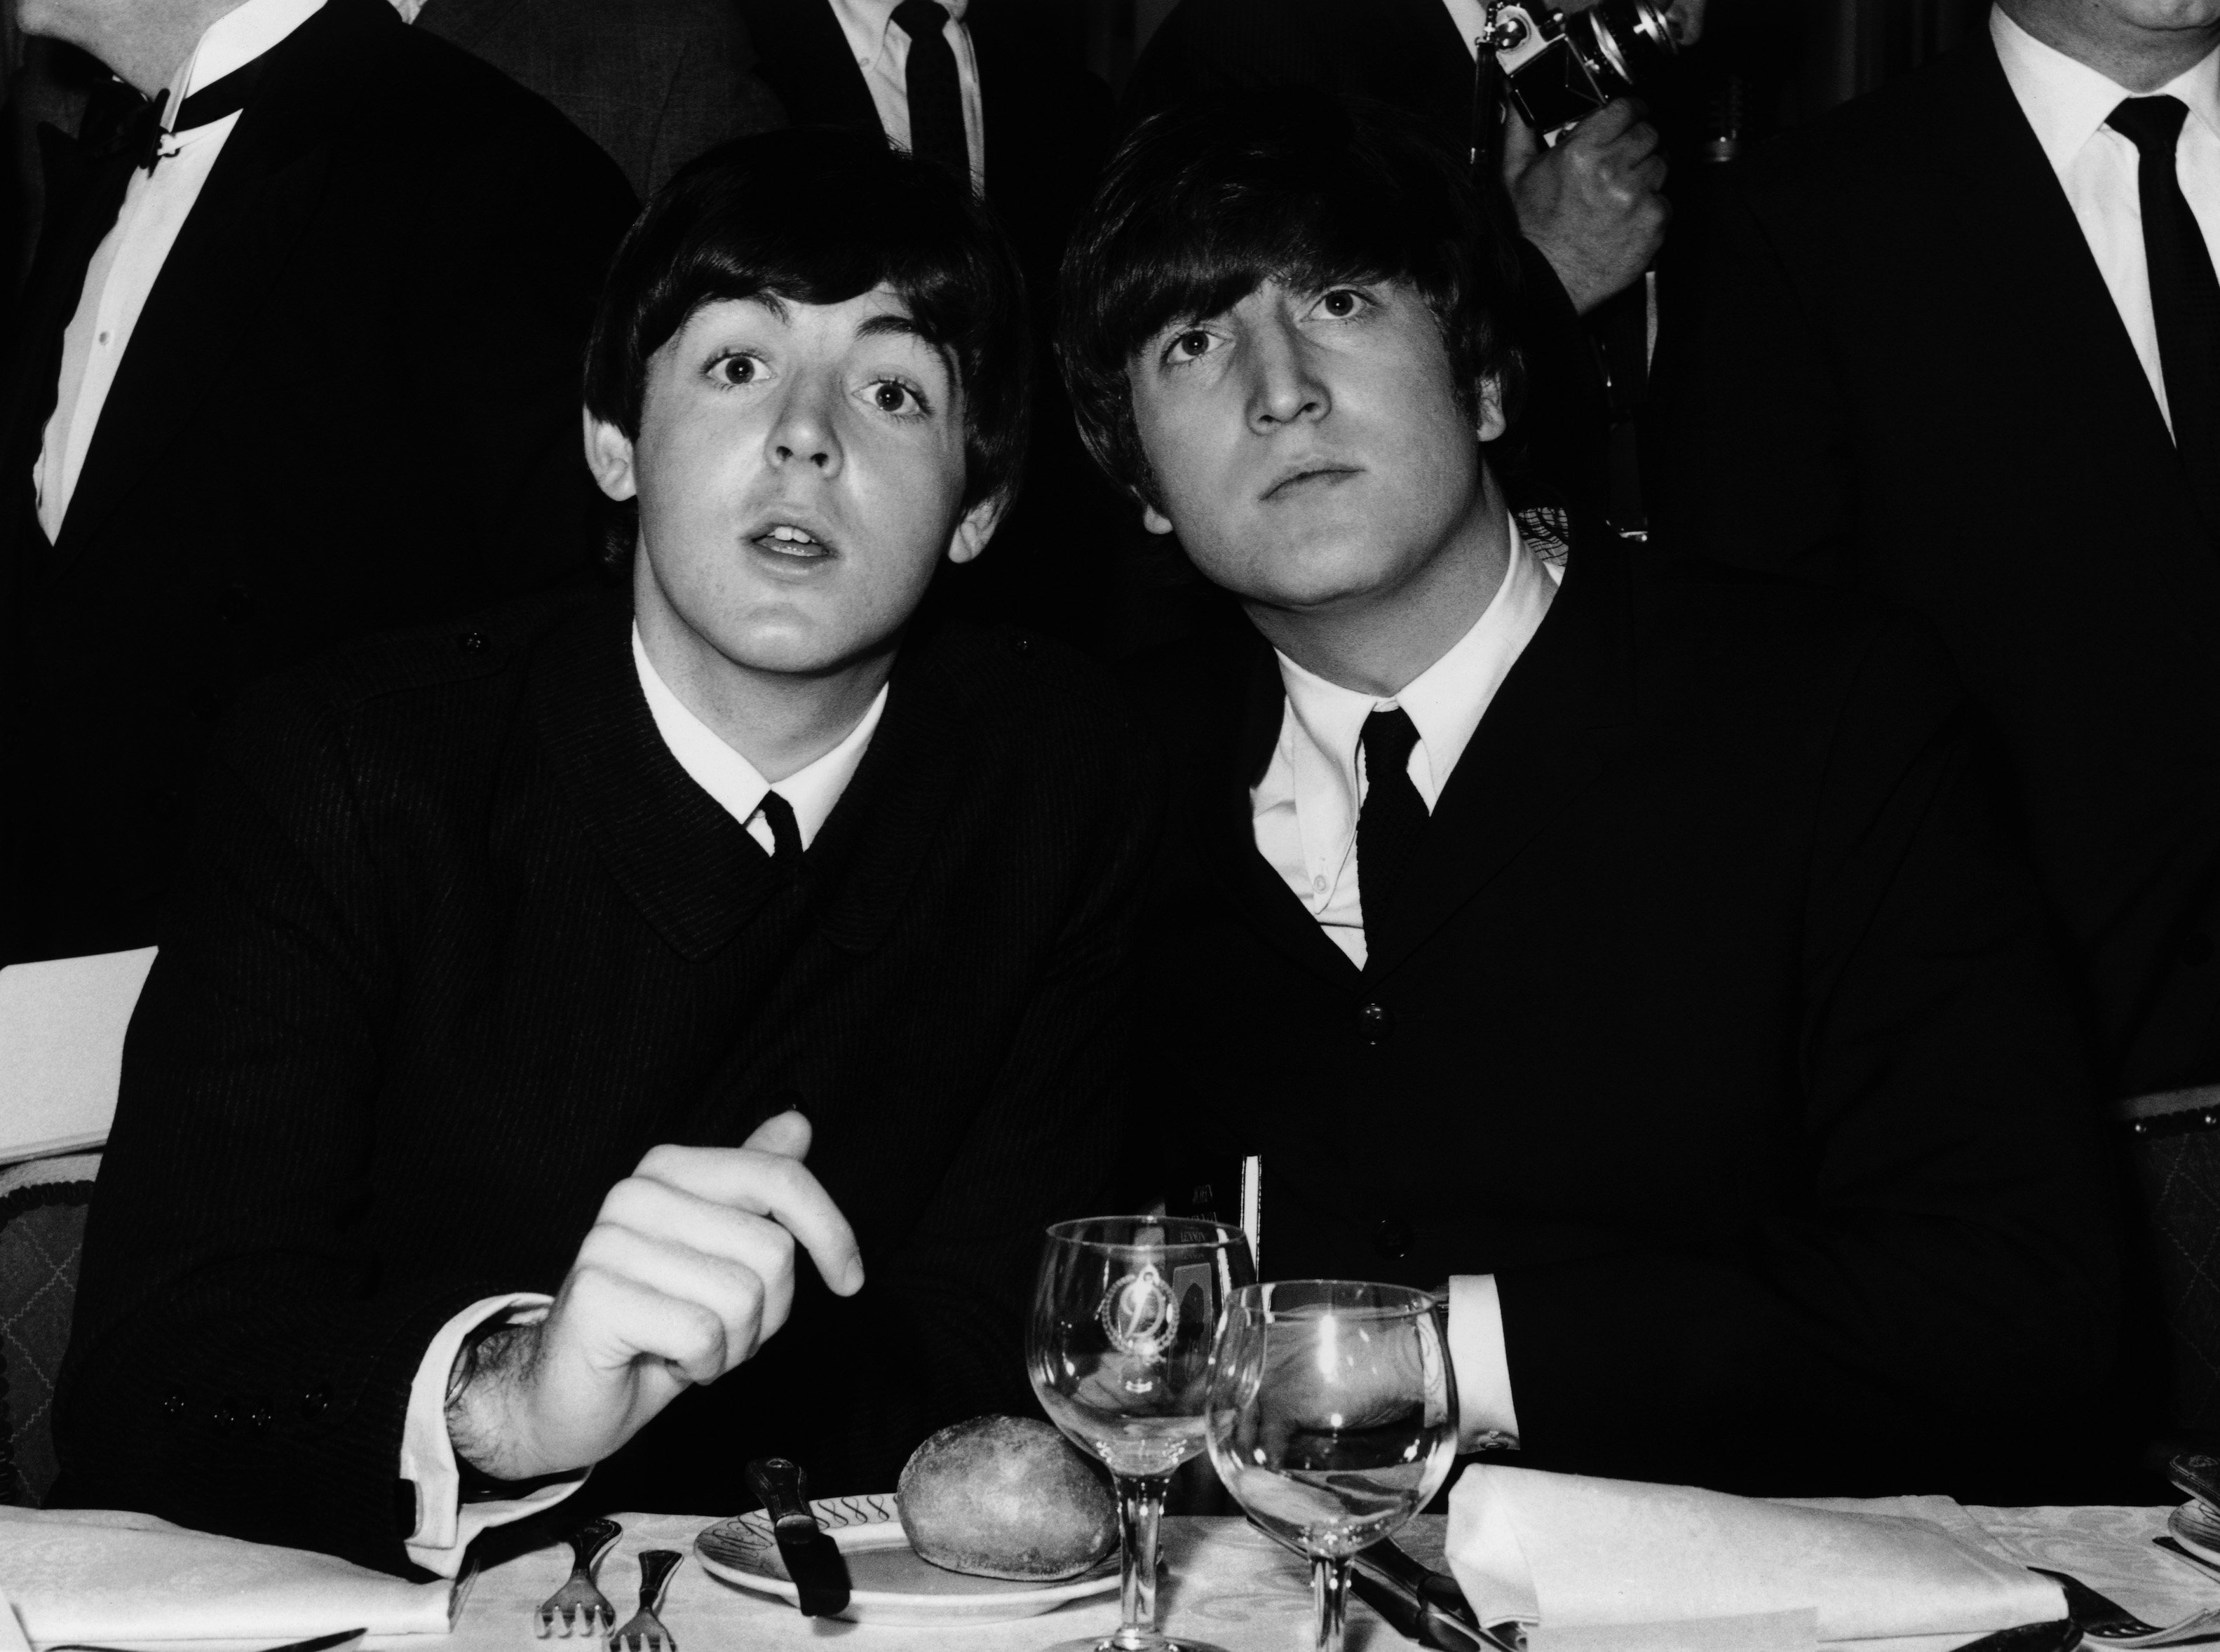 Paul McCartney and John Lennon at the Variety Club Show business Awards in London